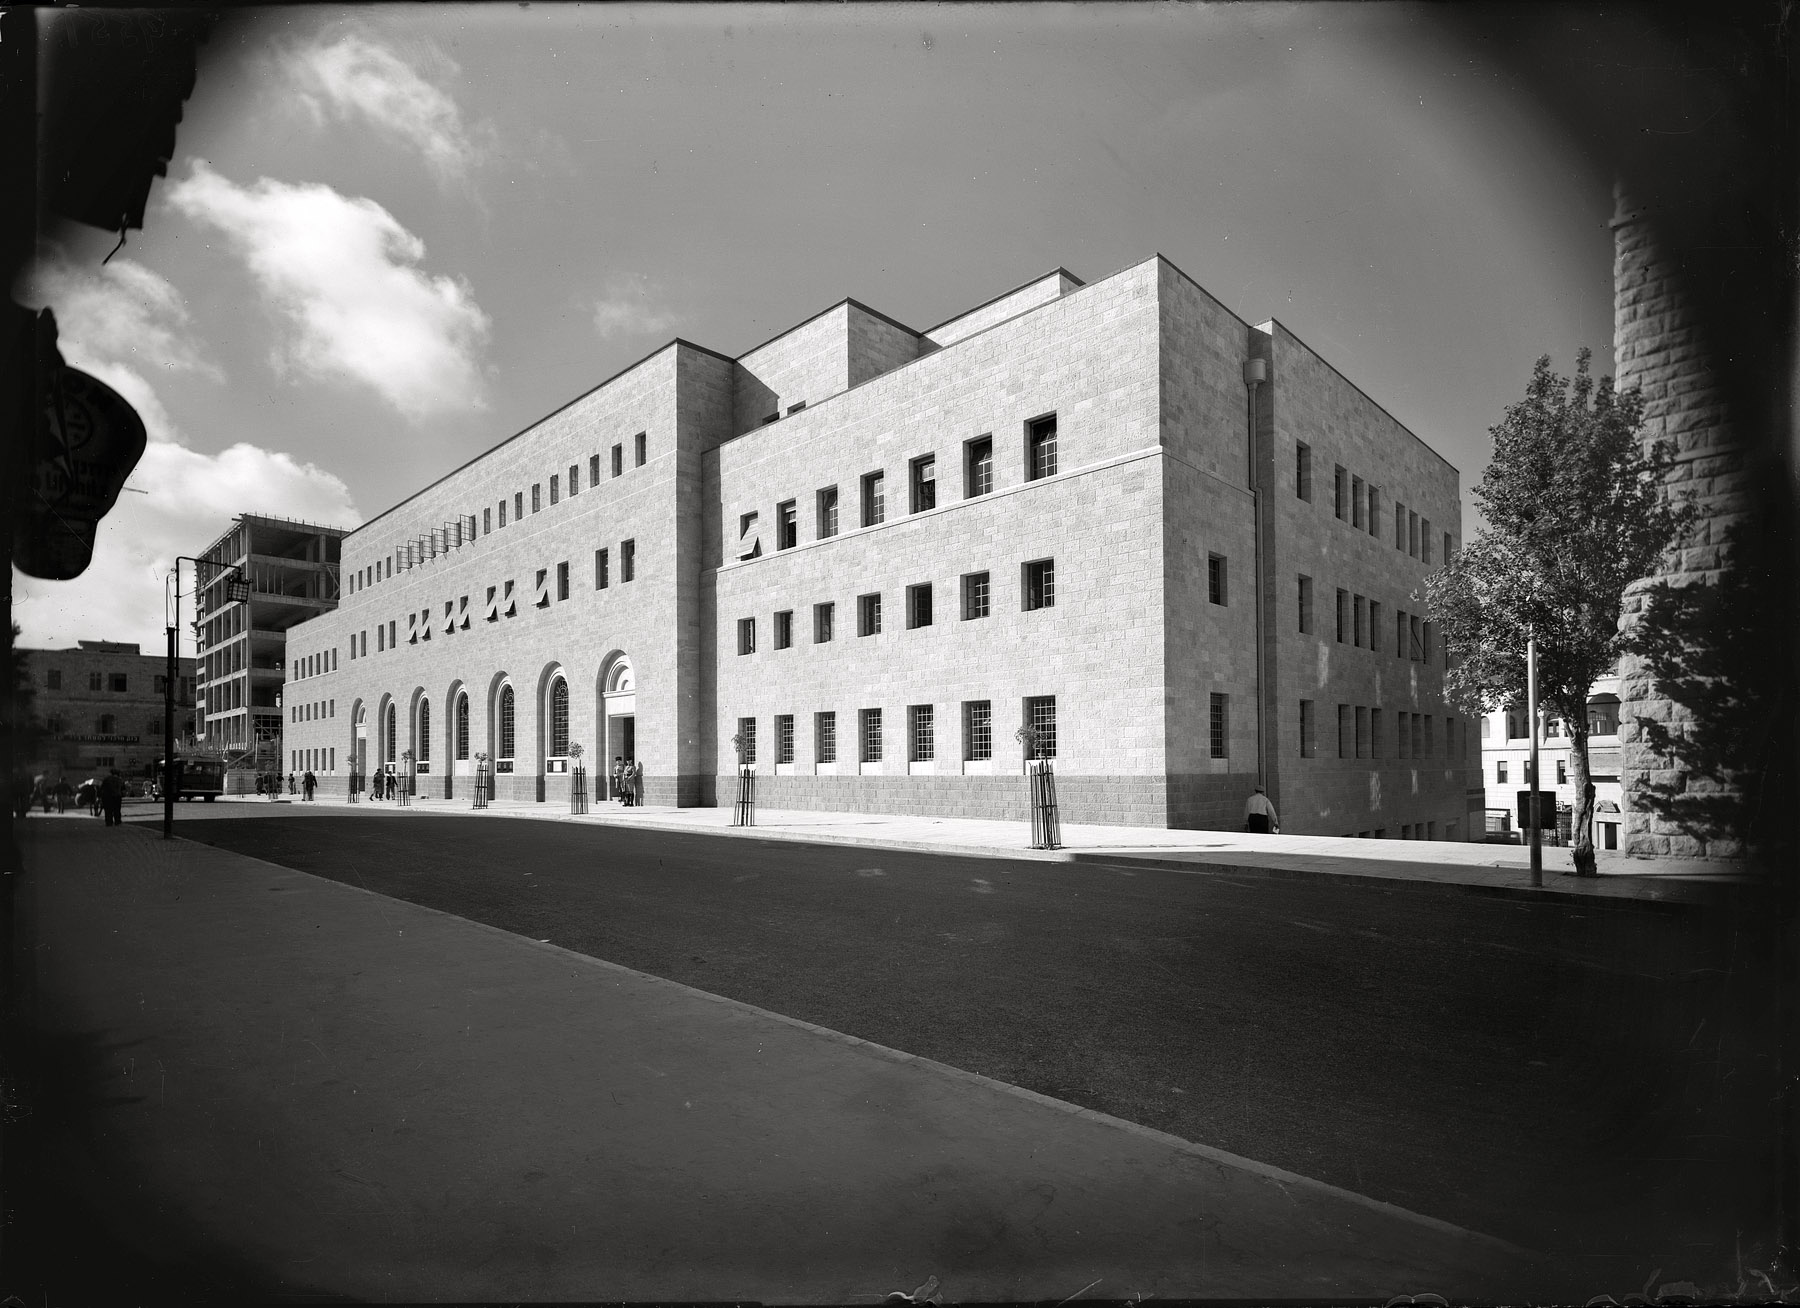 British Mandate Palestine, 1938. "New general post office building in Jerusalem, N.W. corner on Jaffa Road, opened June 17, 1938, by His Excellency." 5x7 dry-plate glass negative, Matson Photo Service. View full size.